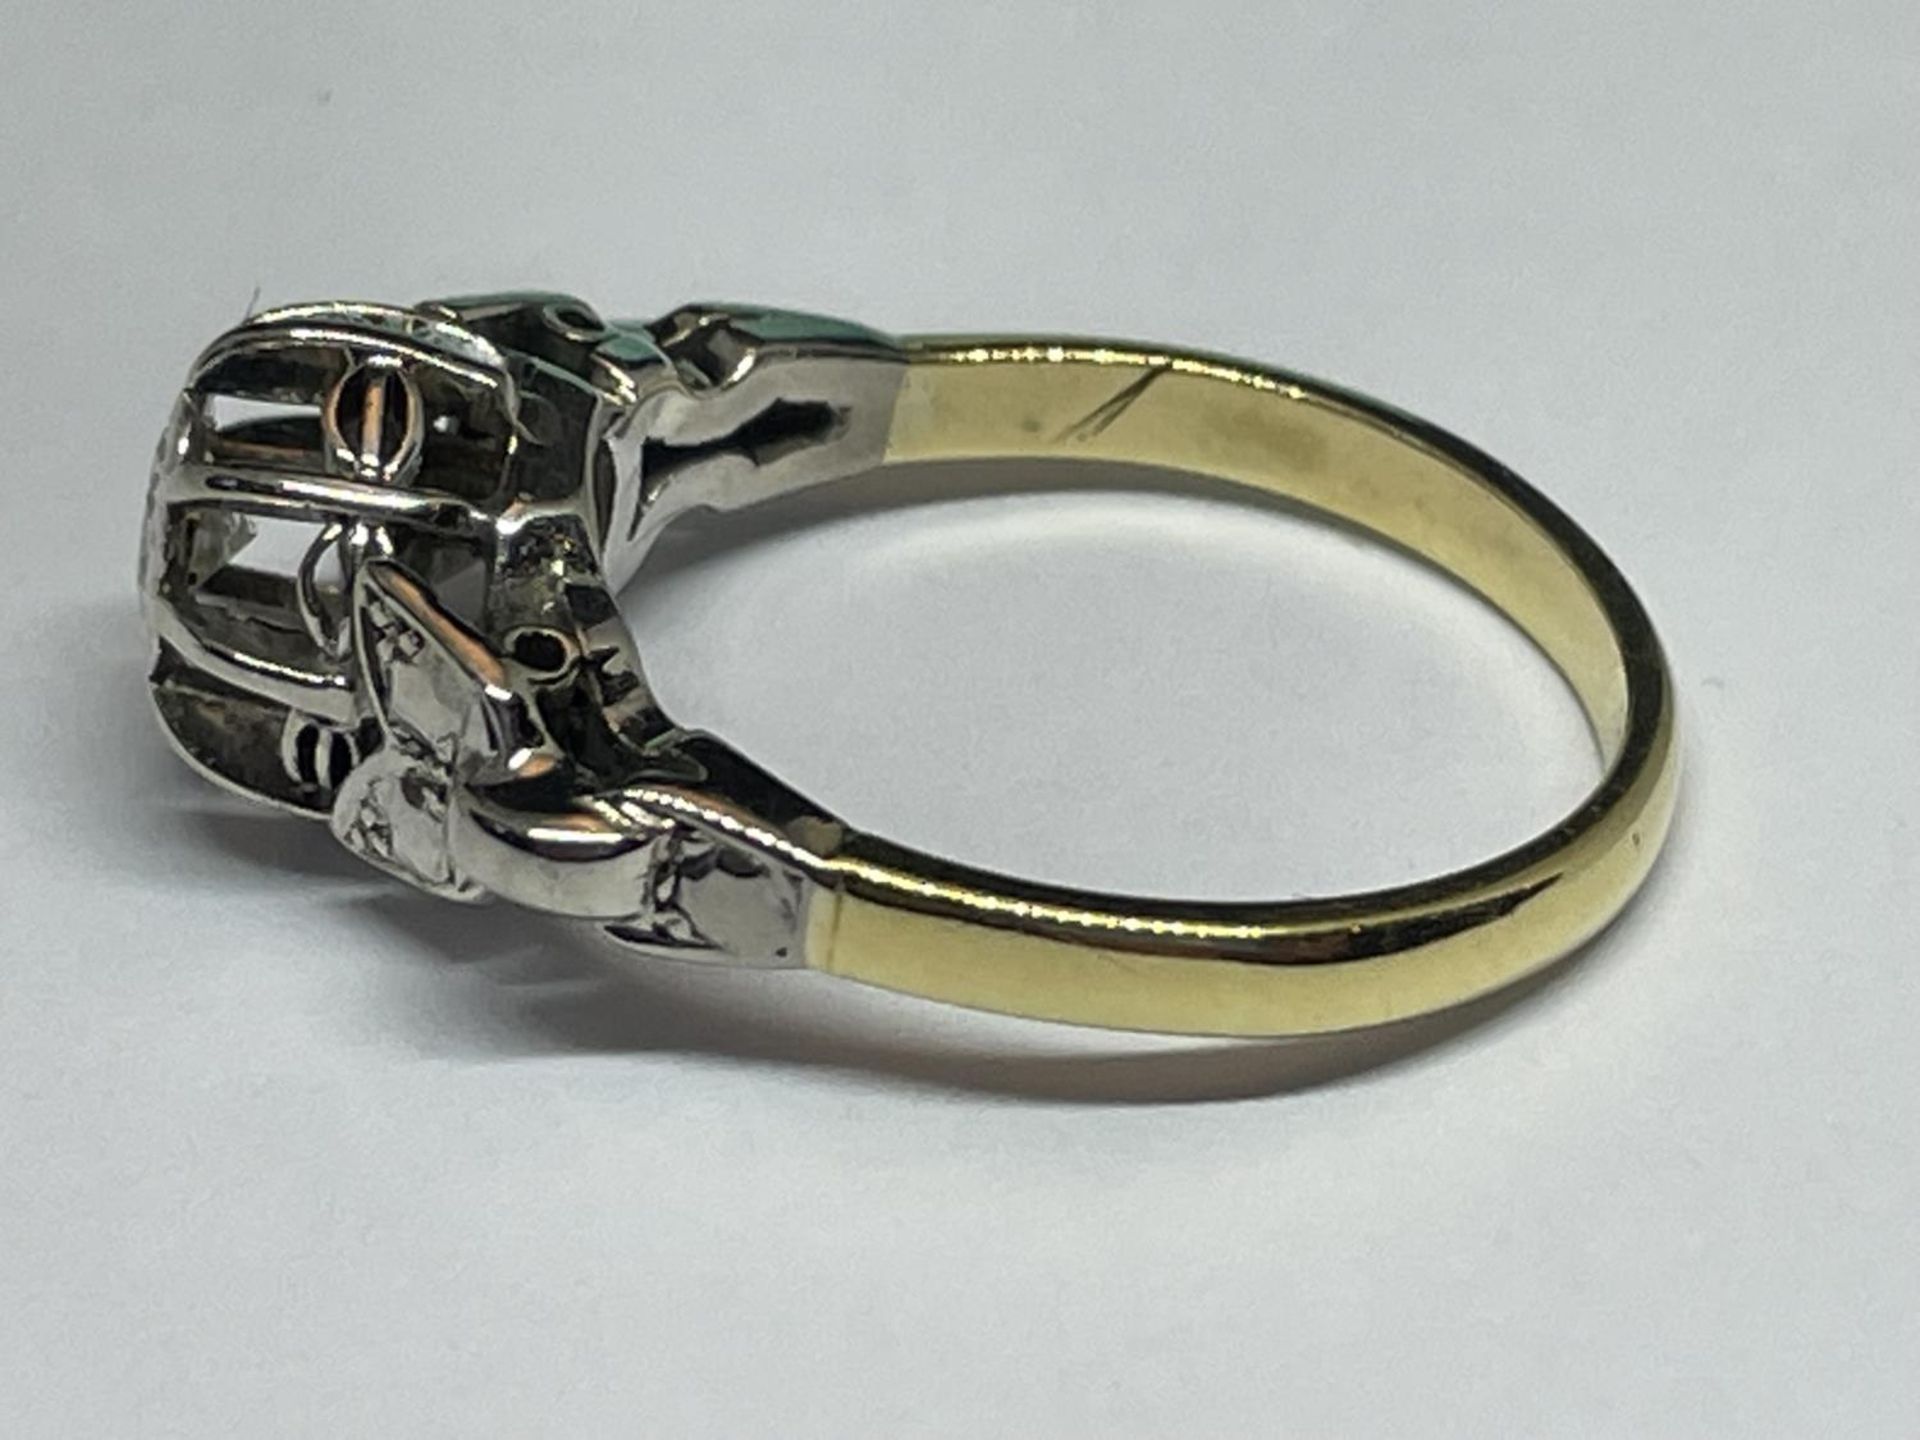 AN 18 CARAT GOLD AND PLATINUM DIAMOND SOLITAIRE RING SIZE M/N IN A PRESENTATION BOX - Image 2 of 4